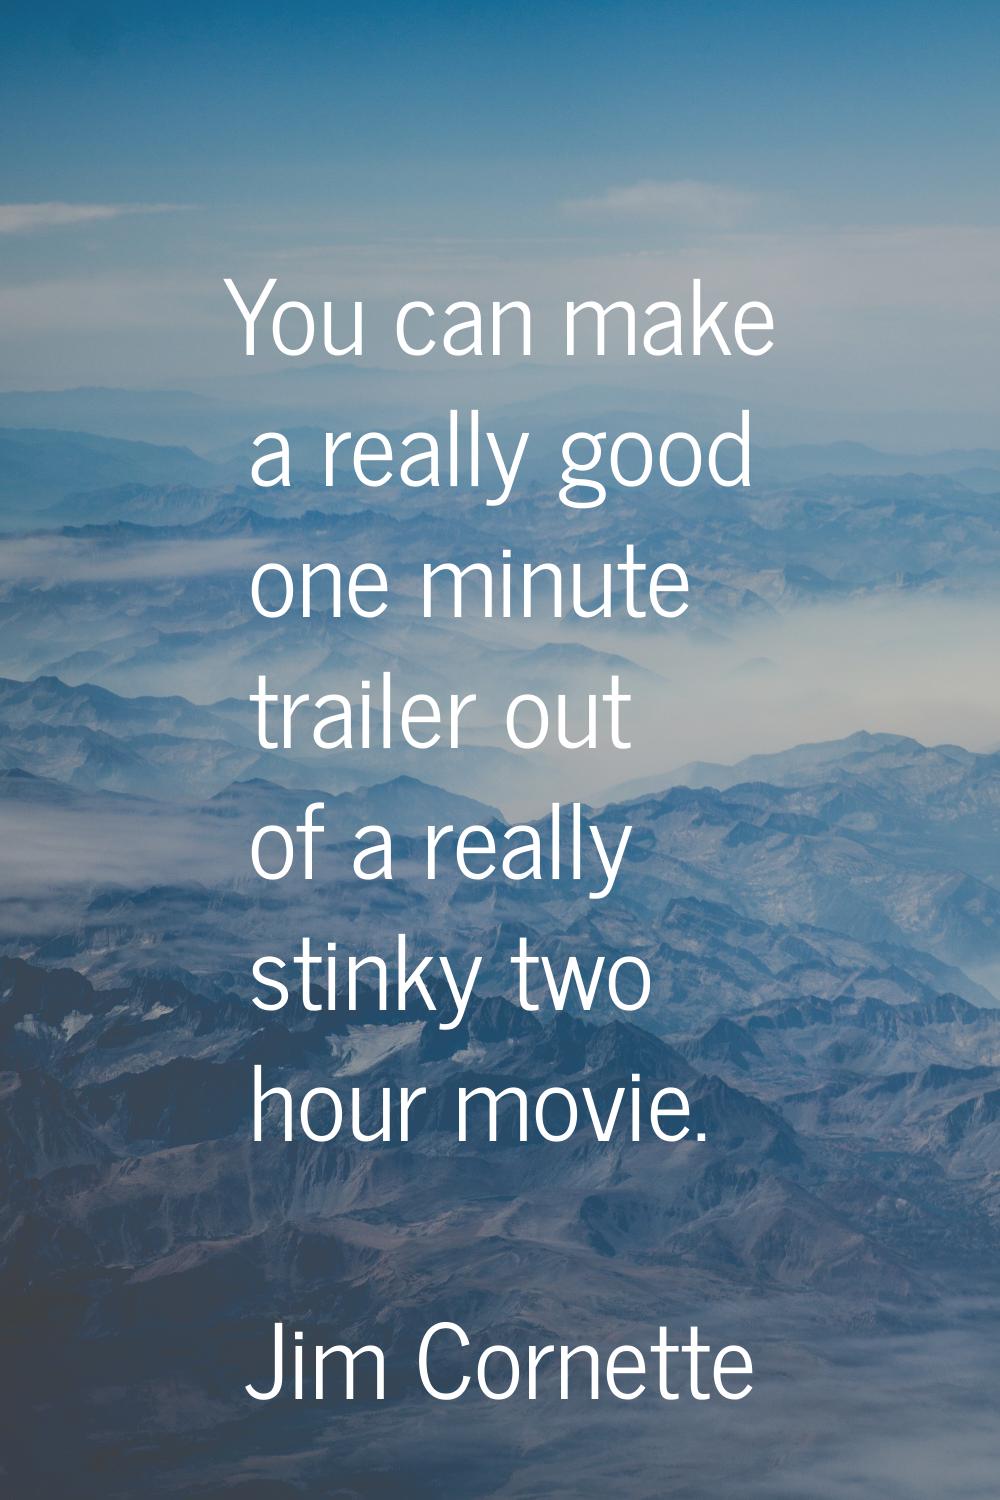 You can make a really good one minute trailer out of a really stinky two hour movie.